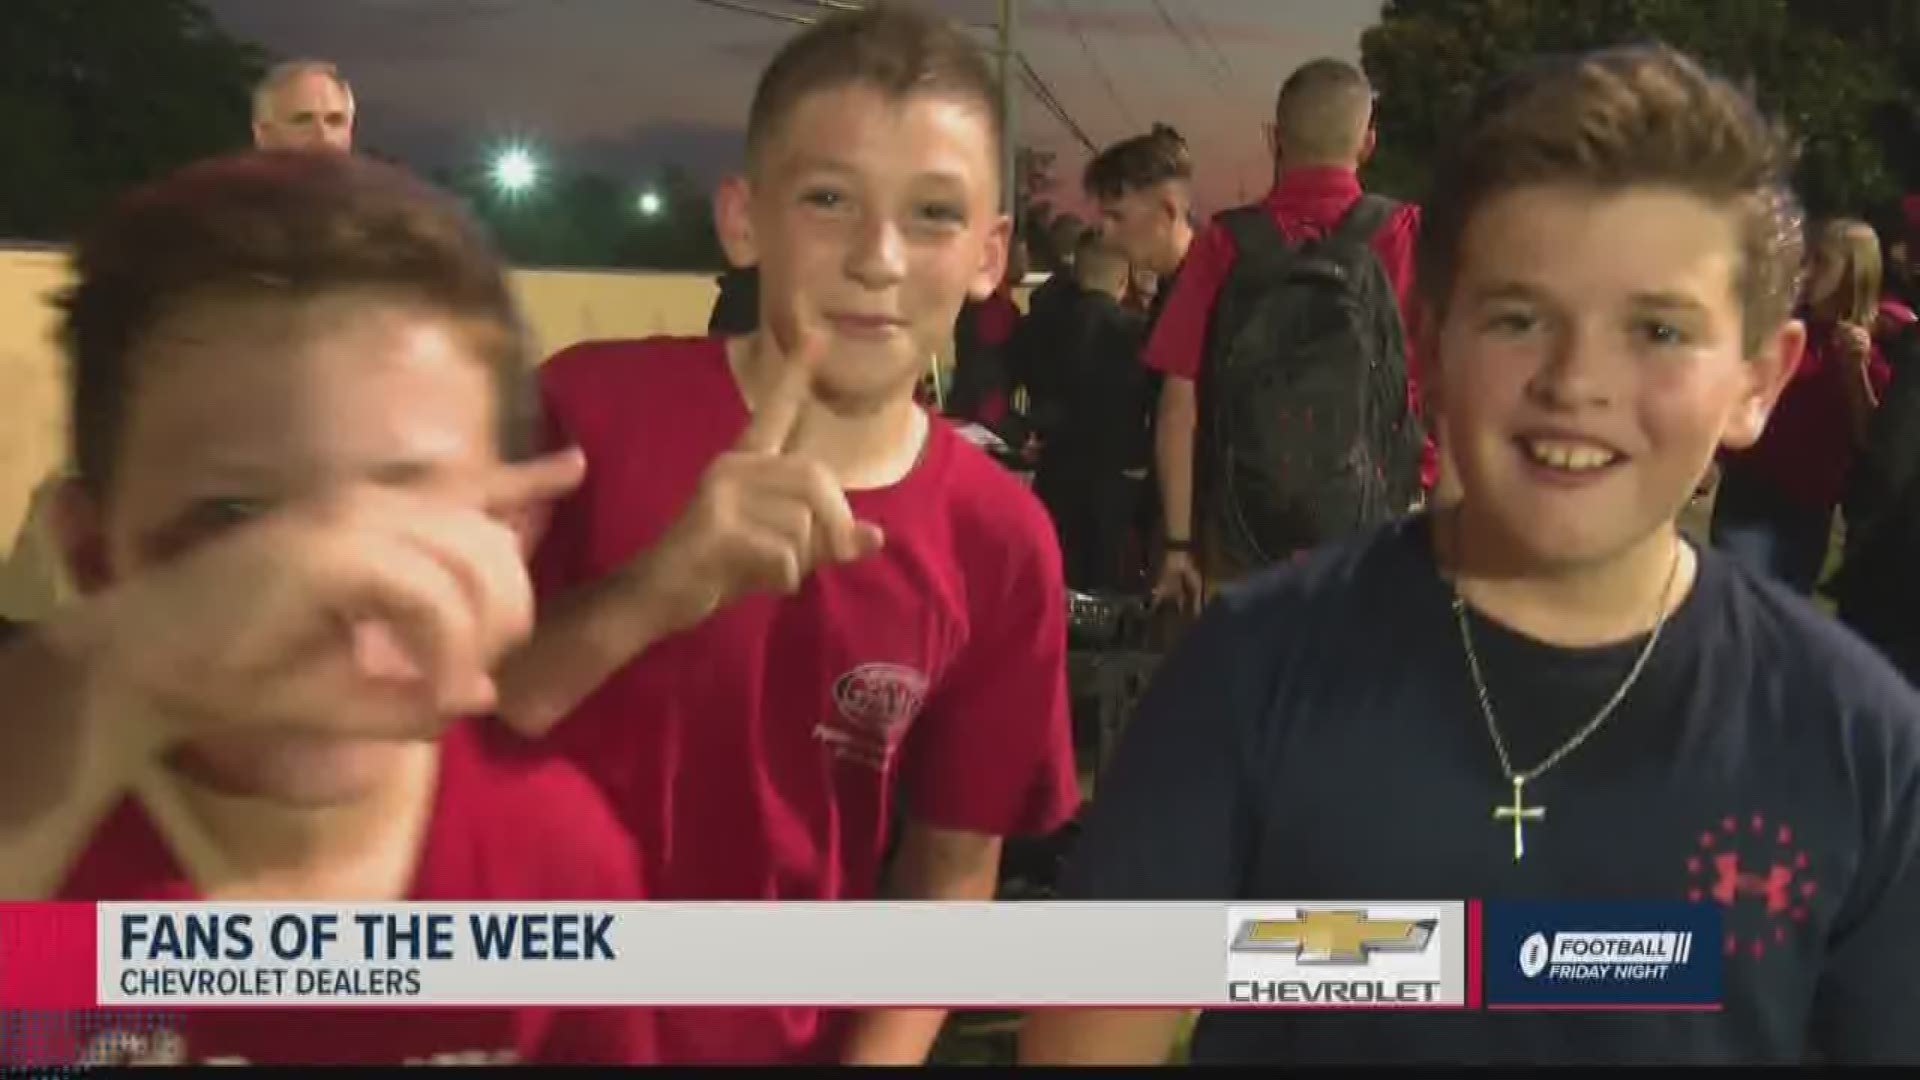 Here are your highlights from Football Friday Night on September 13.